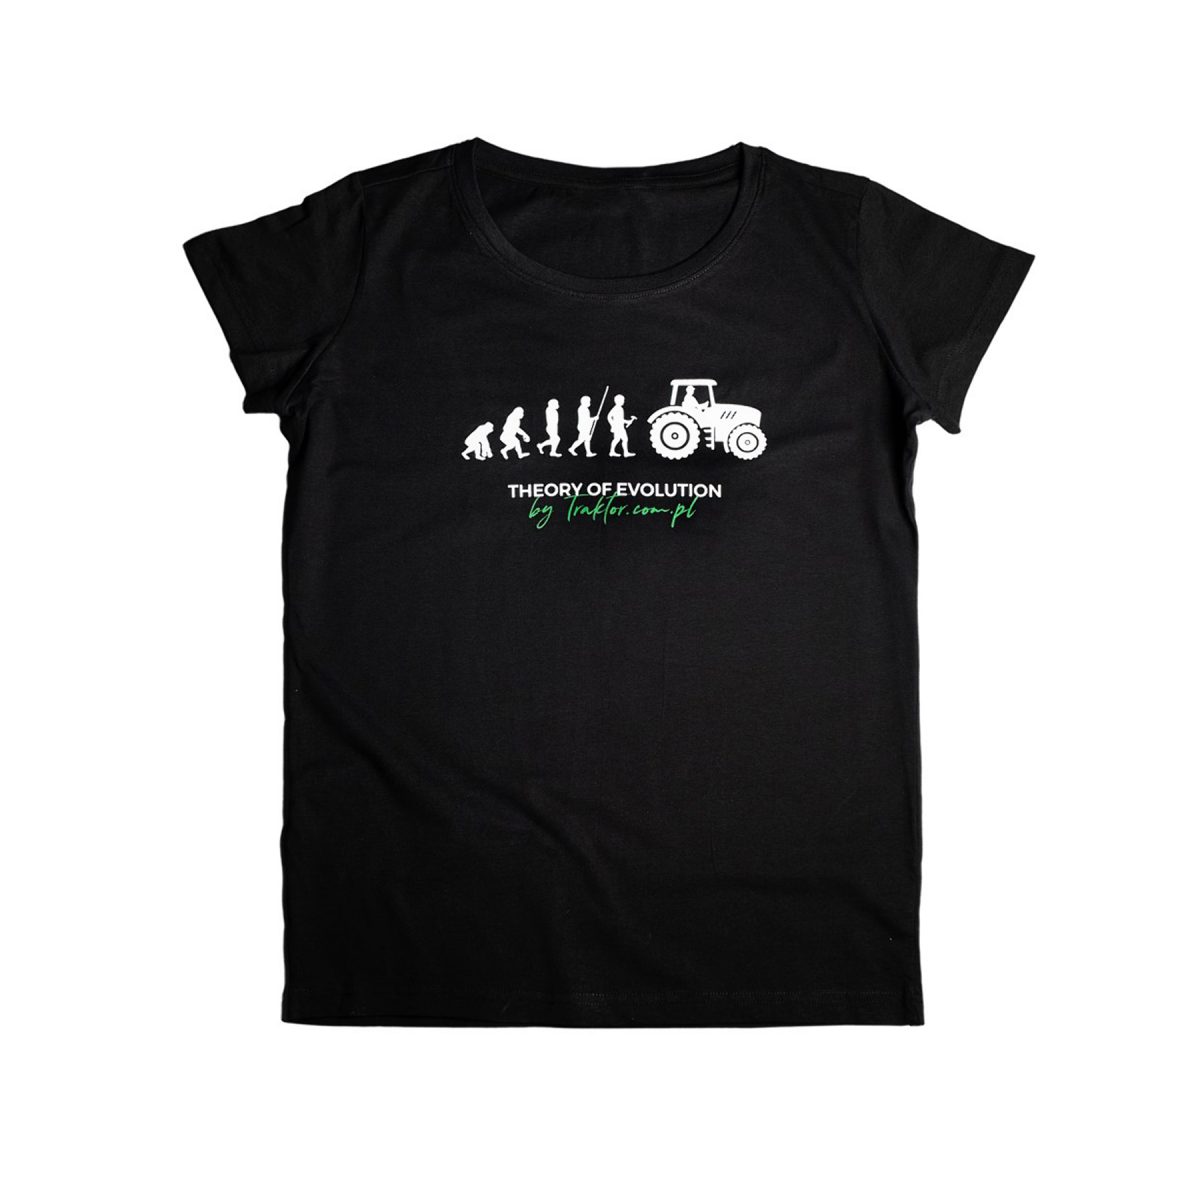 "Theory of Evolution" T-shirt for women